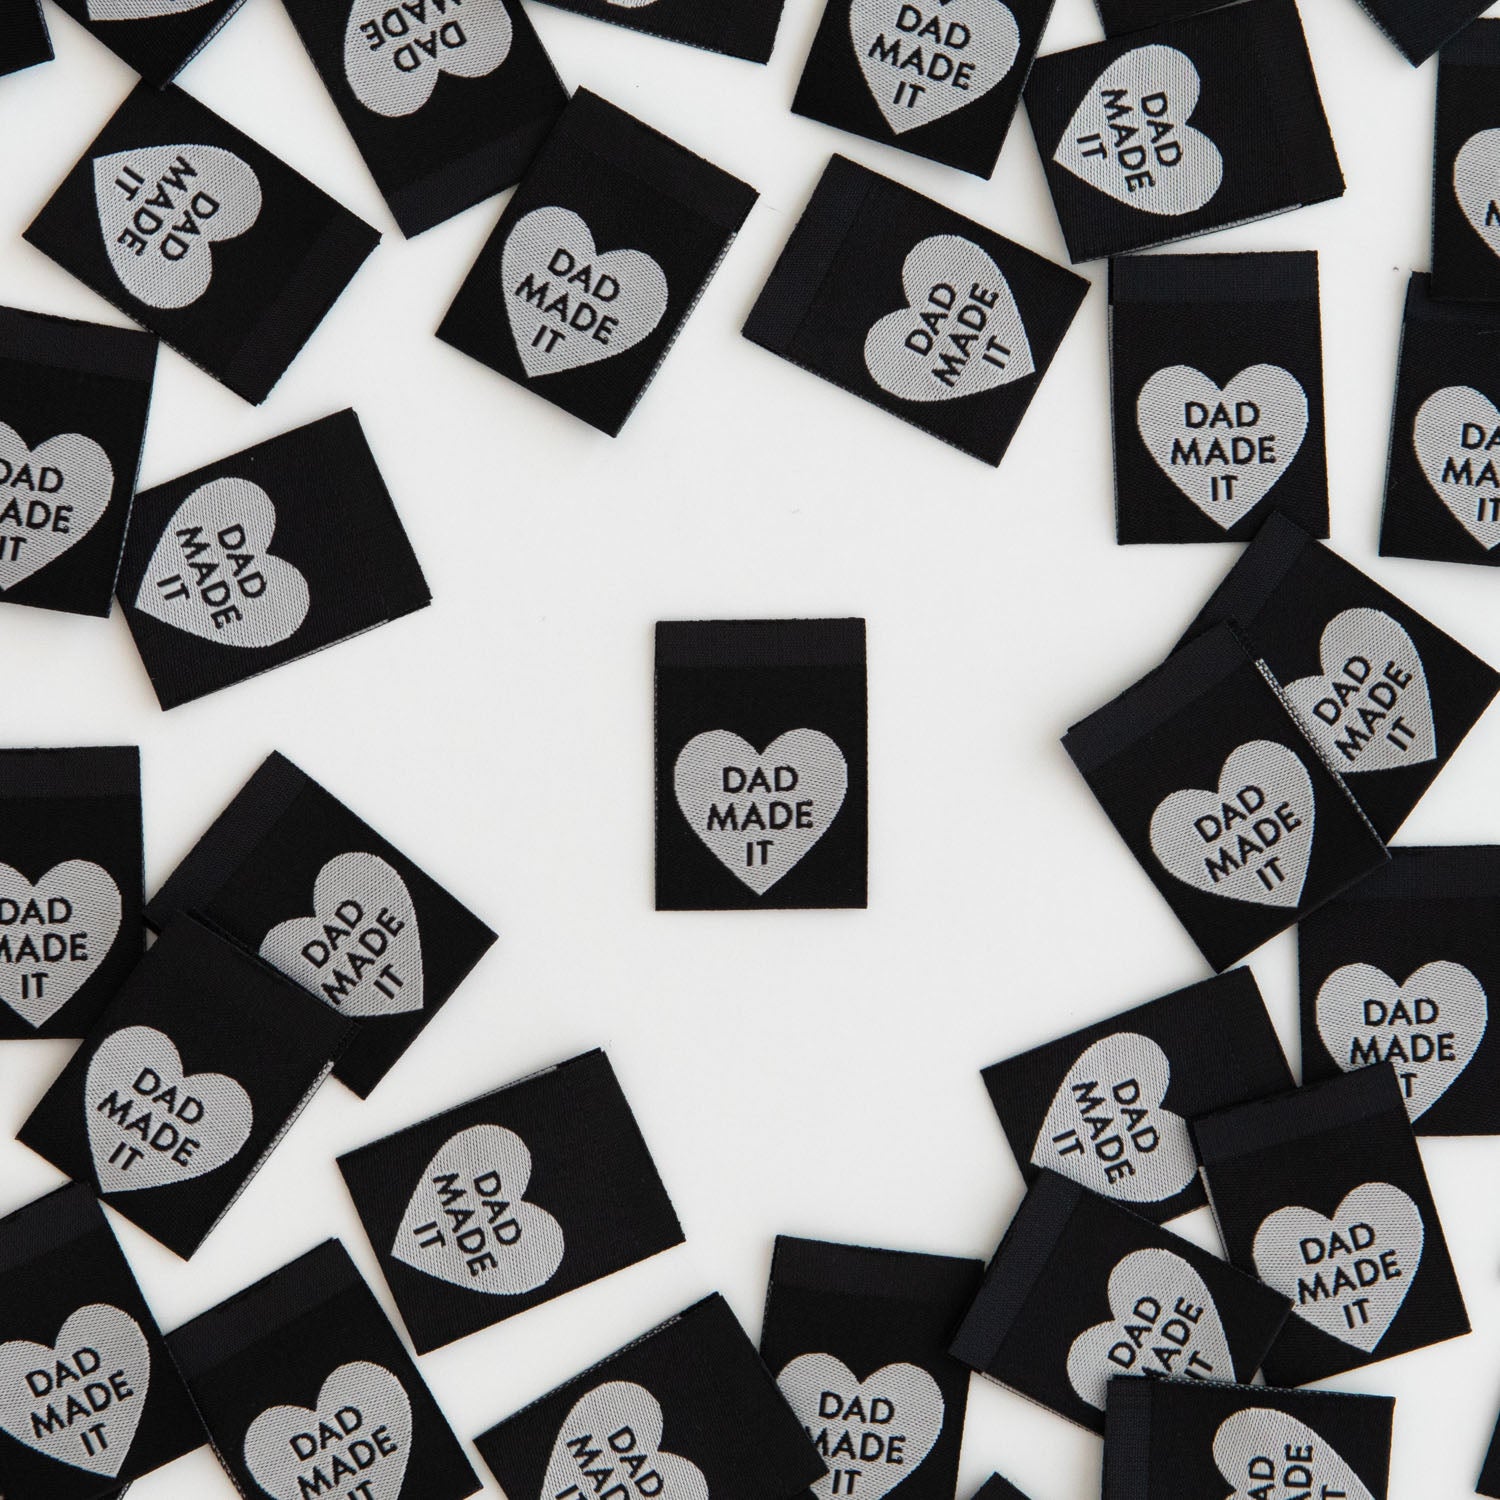 Dad Made It Heart Woven Labels - Sewing Woven Clothing Tags